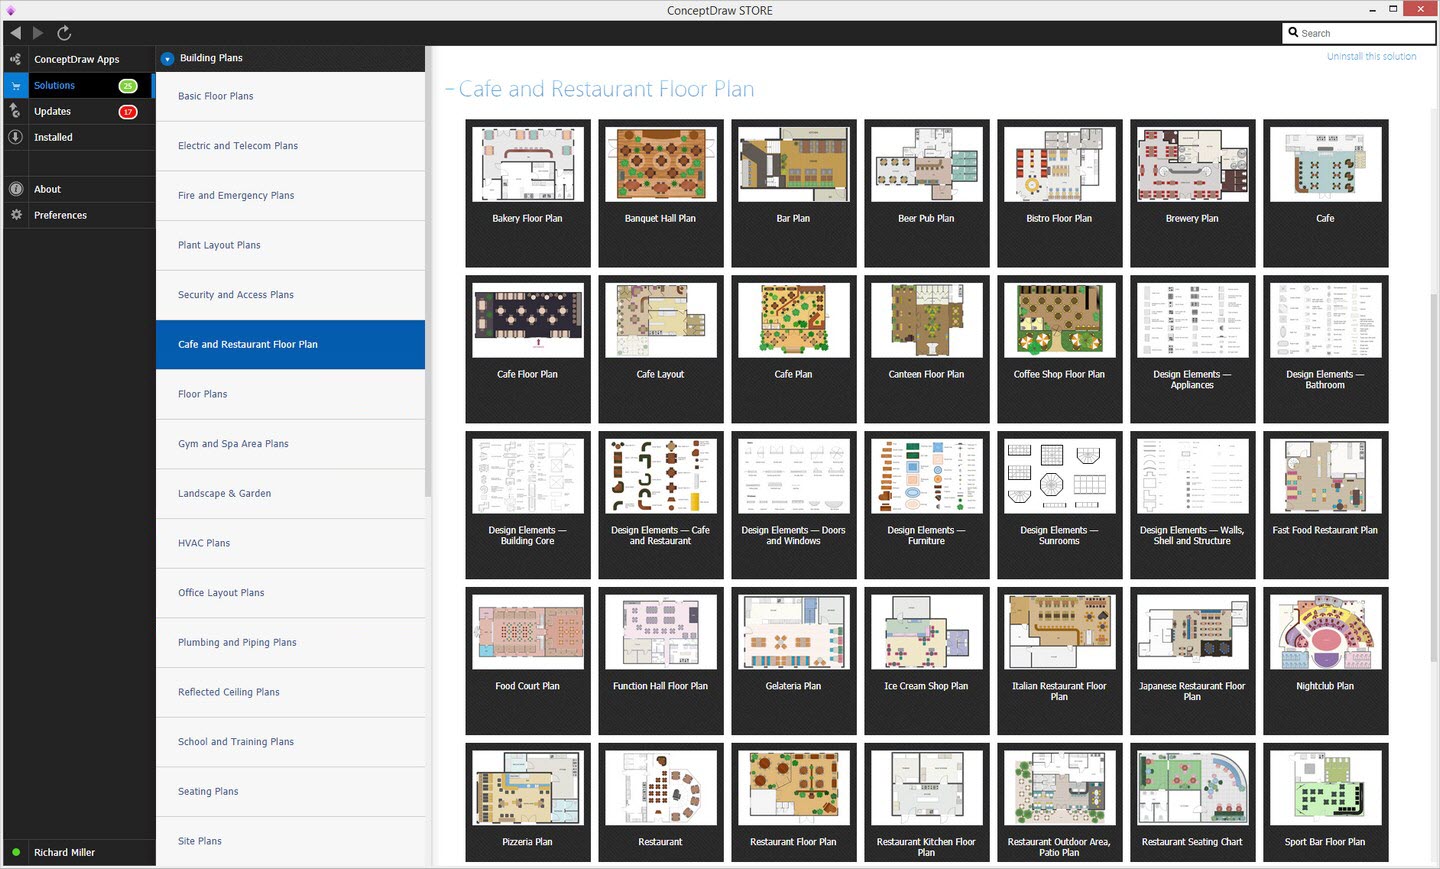 Cafe and Restaurant Floor Plans solution in ConceptDraw STORE